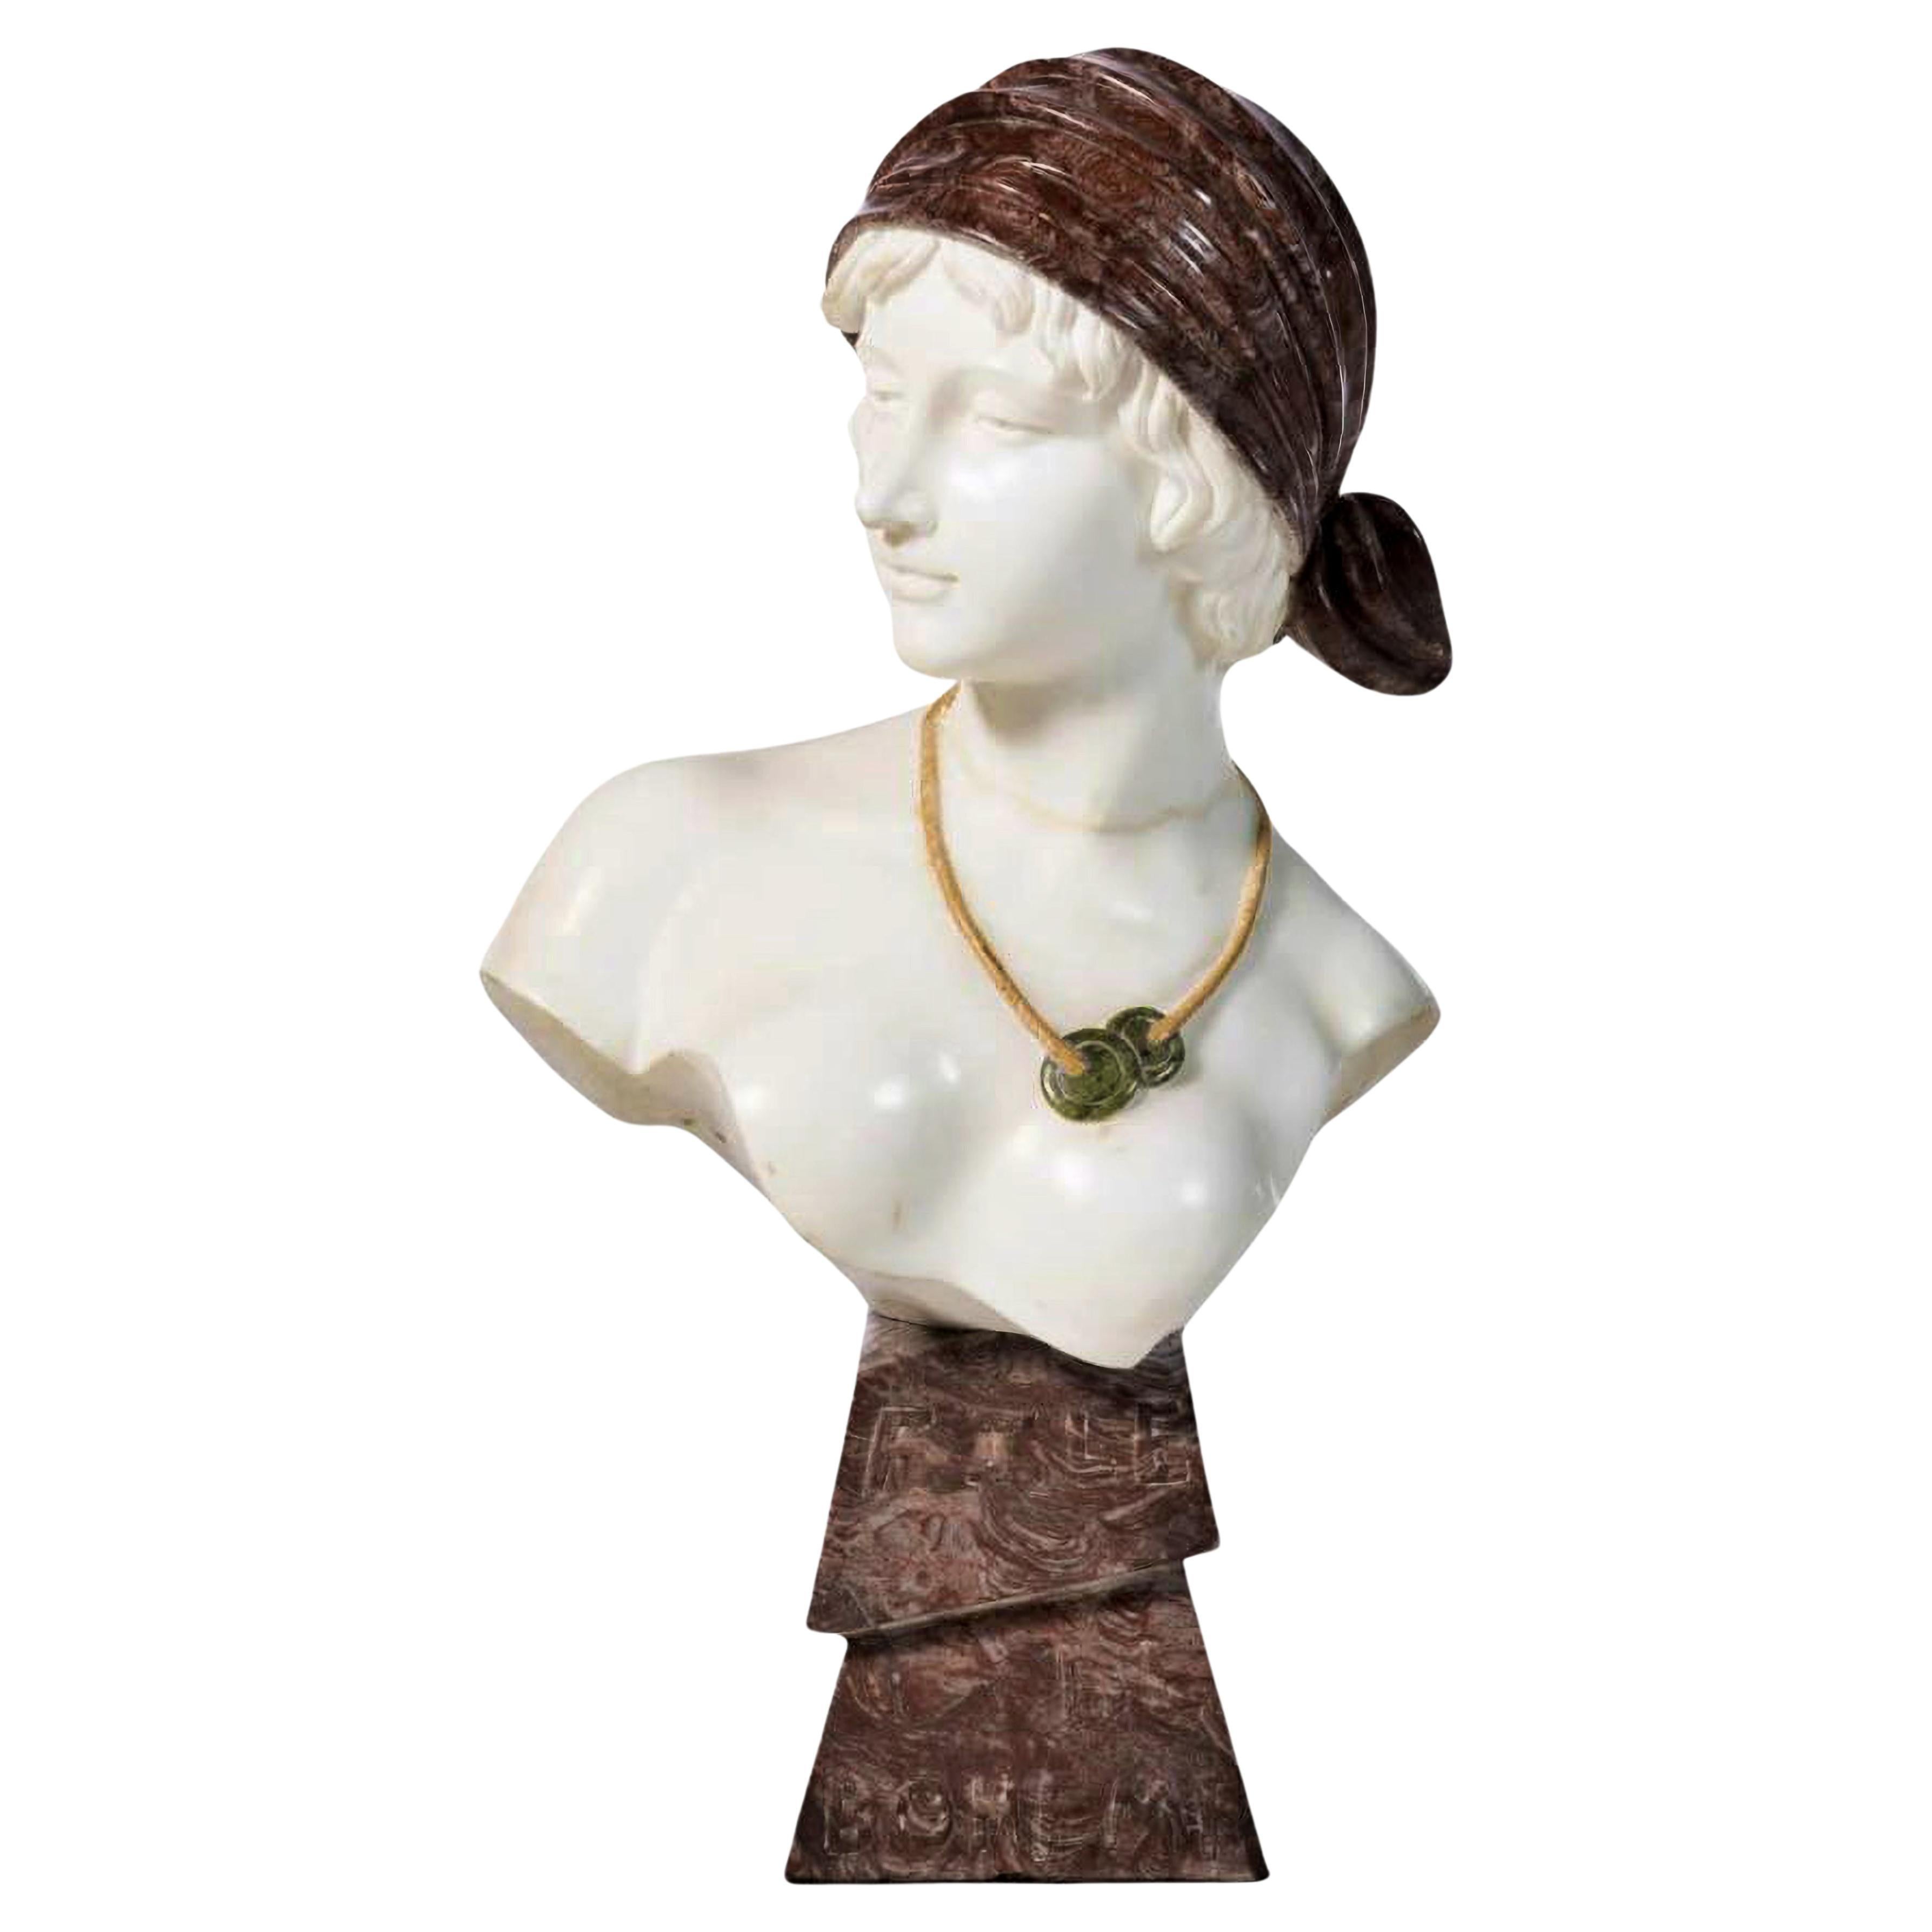 FRENCH ART DECO "FEMALE FIGURE" BUST early 20th Century